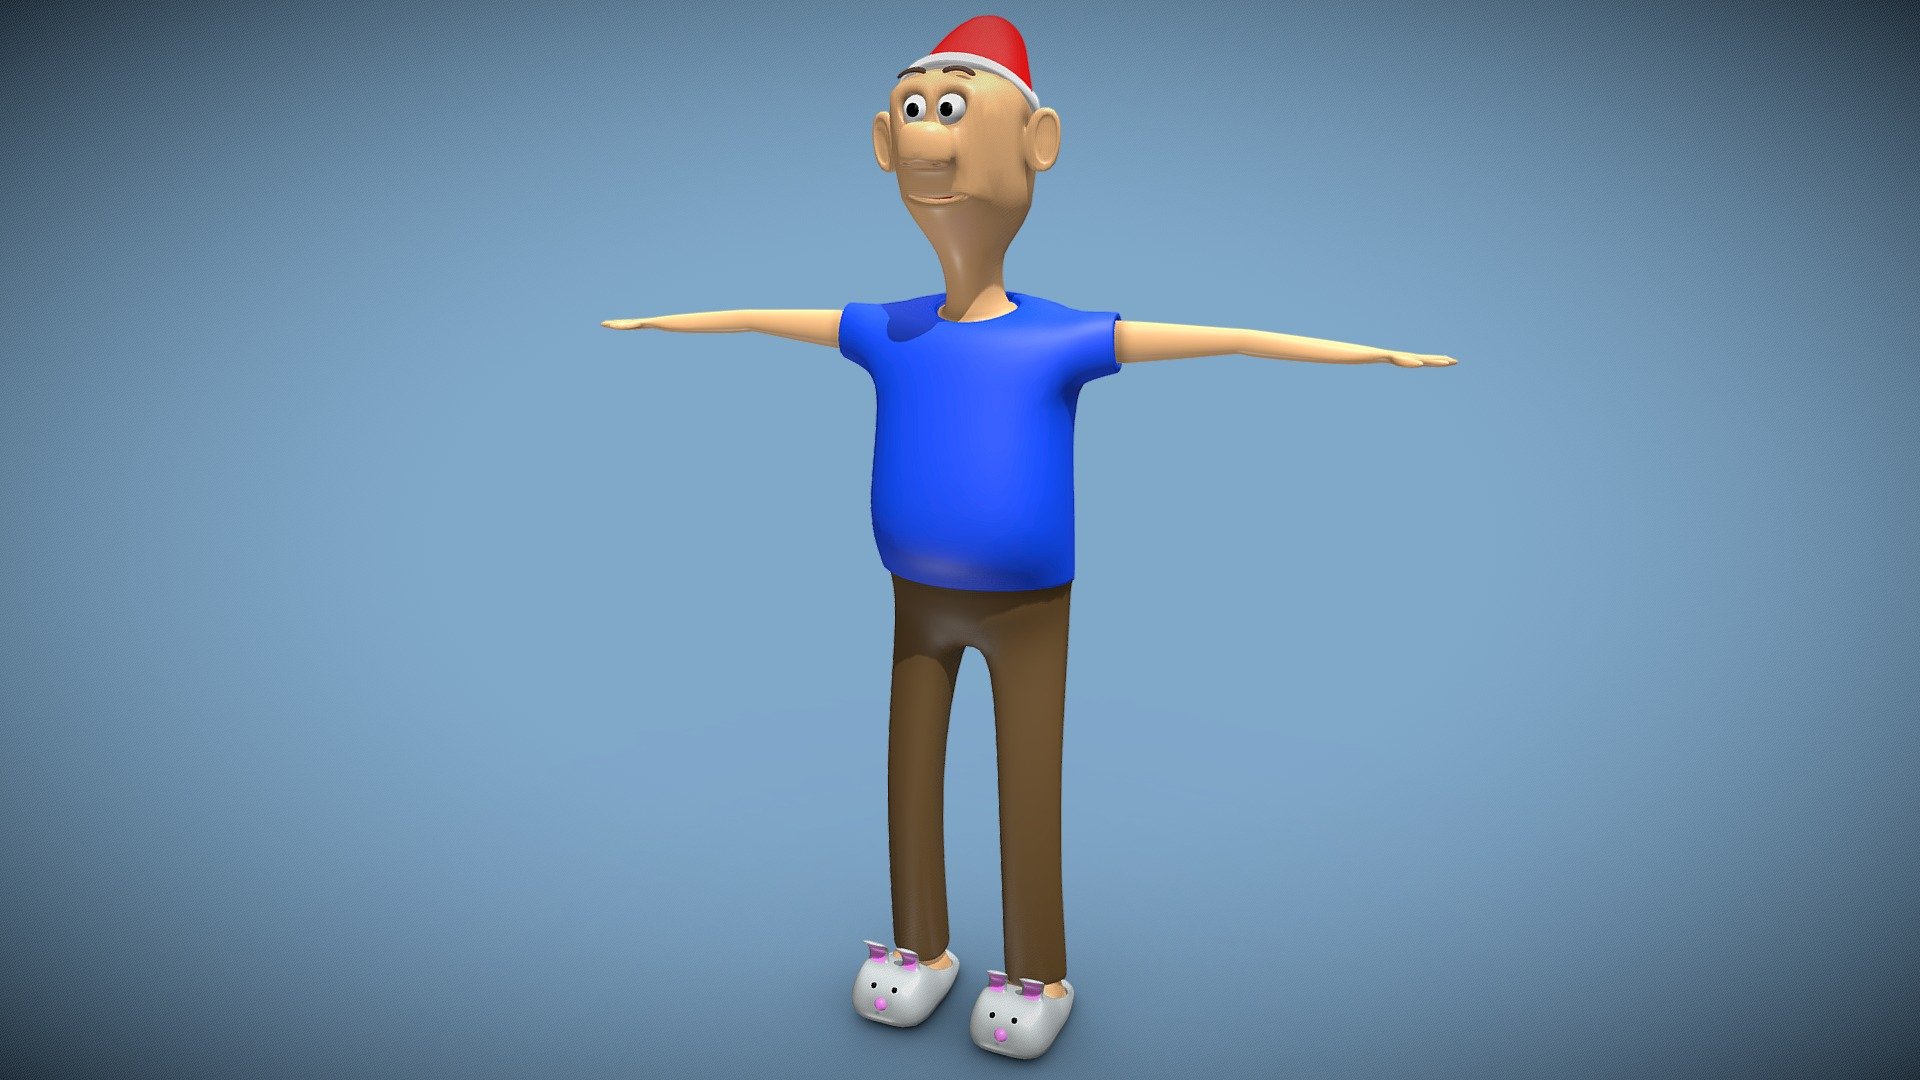 A silly cartoon guy that I made with Blender 3d model